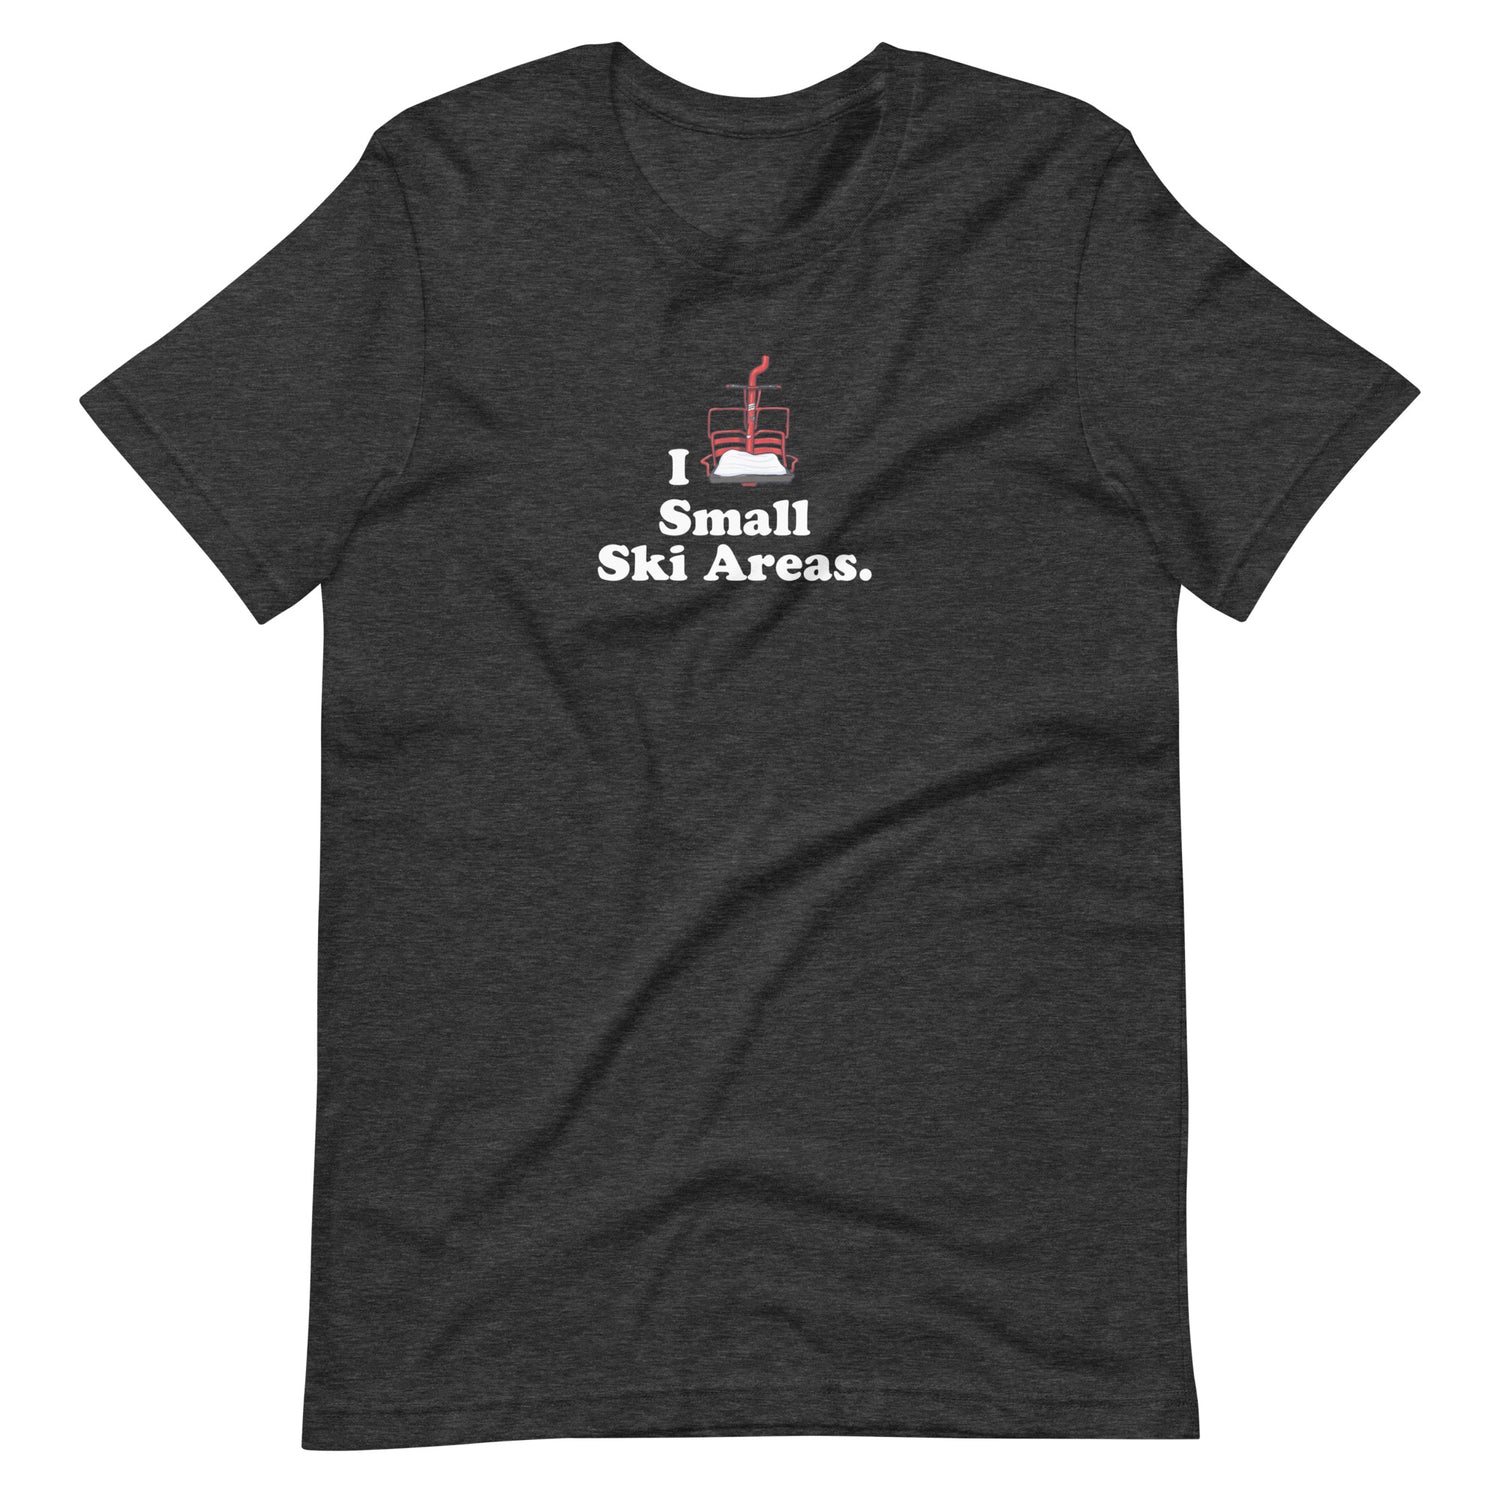 Front of Dark Gray Unisex Short-Sleeve Cotton T-Shirt with text I Love Small Ski Areas